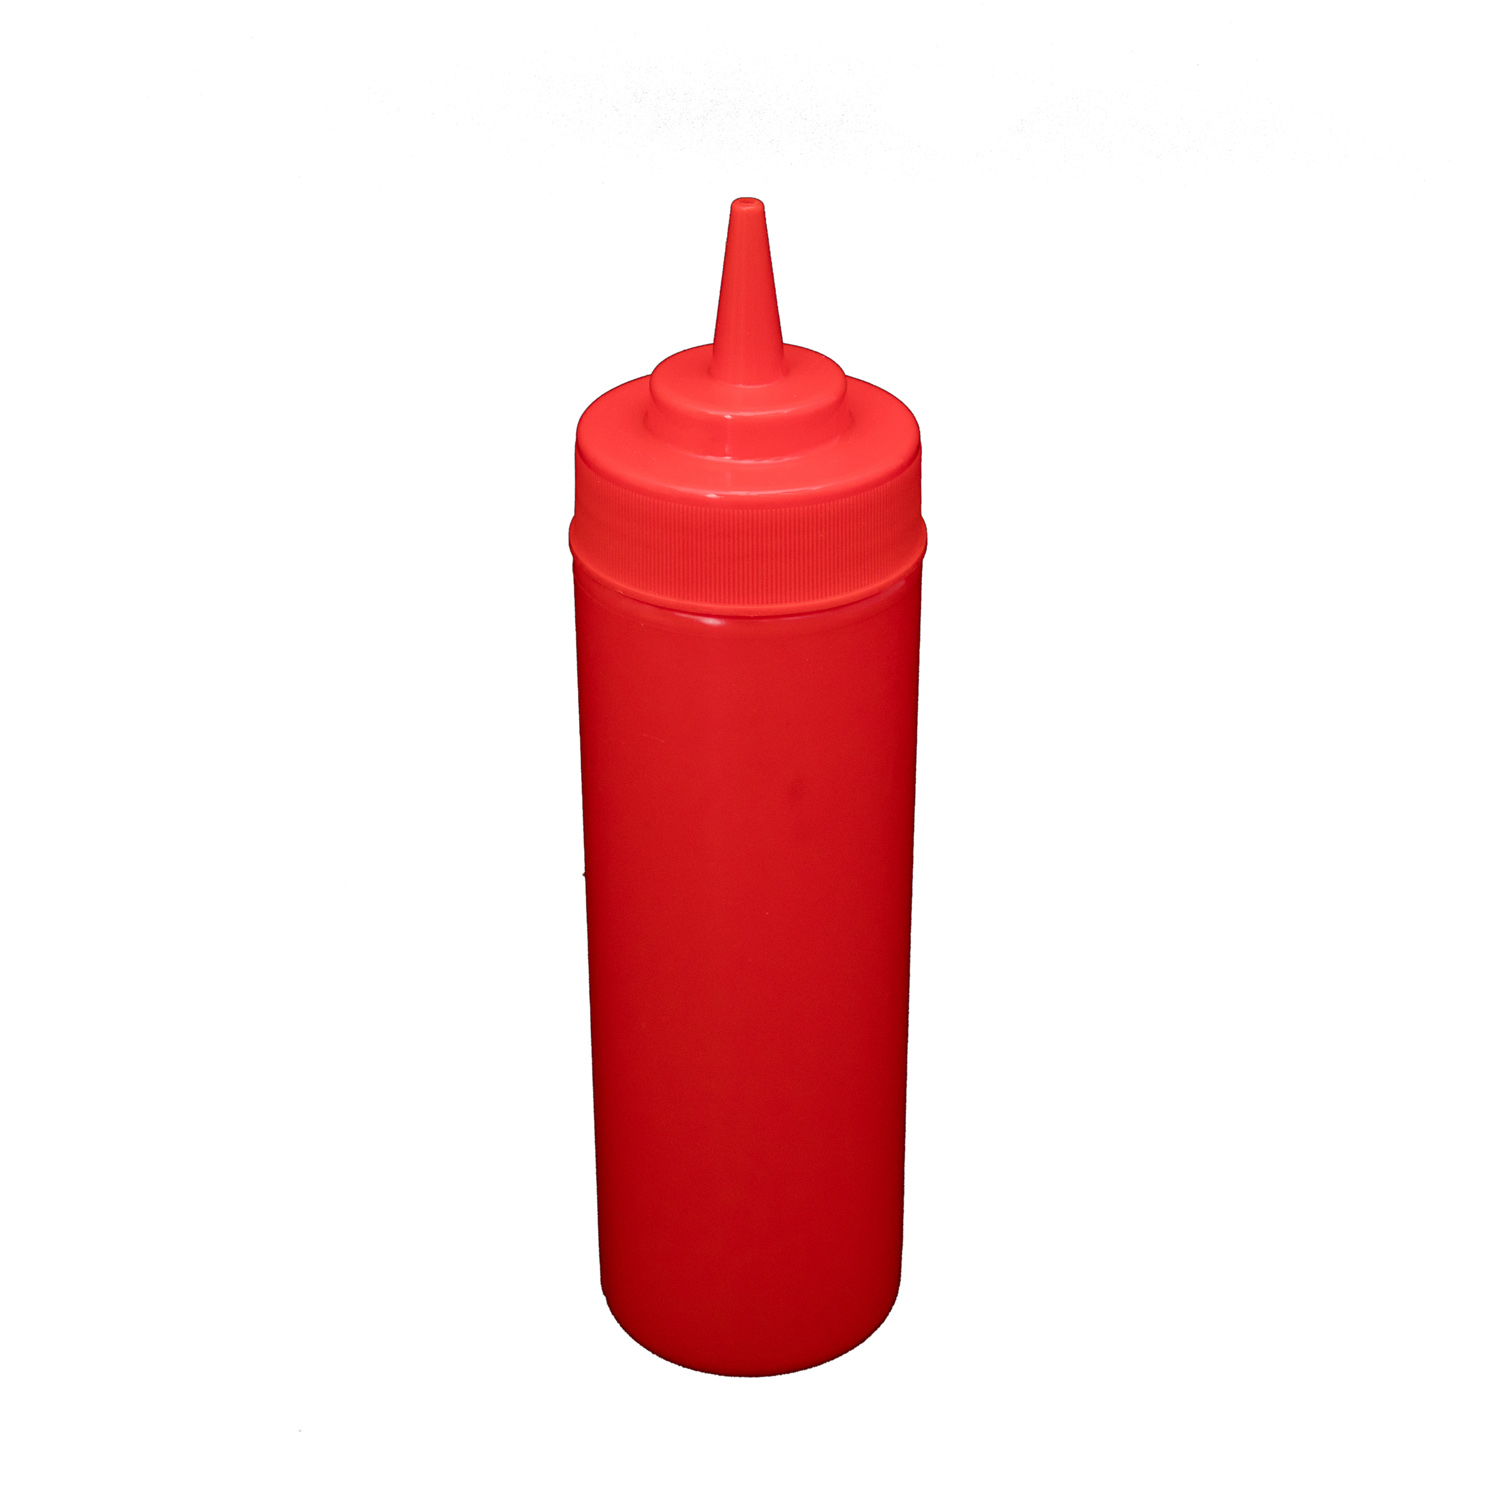 CAC China SQBT-W-12R Red Wide-Mouth Plastic Squeeze Bottle 12 oz.